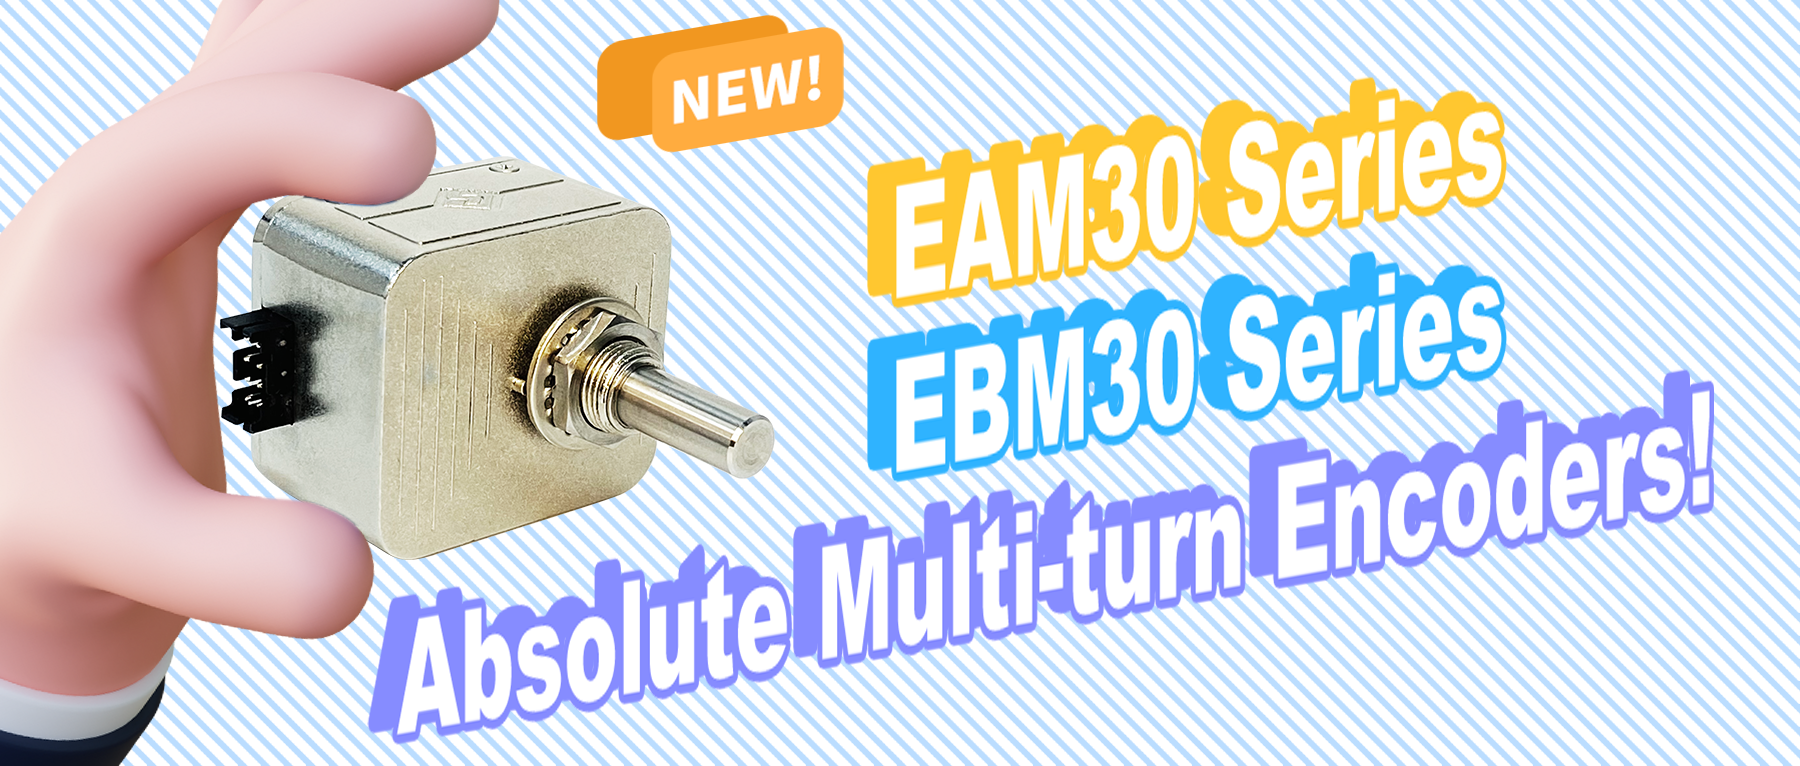 New Product Launch ——EAM30 and EBM30 Series Absolute Multi-turn Encoders!